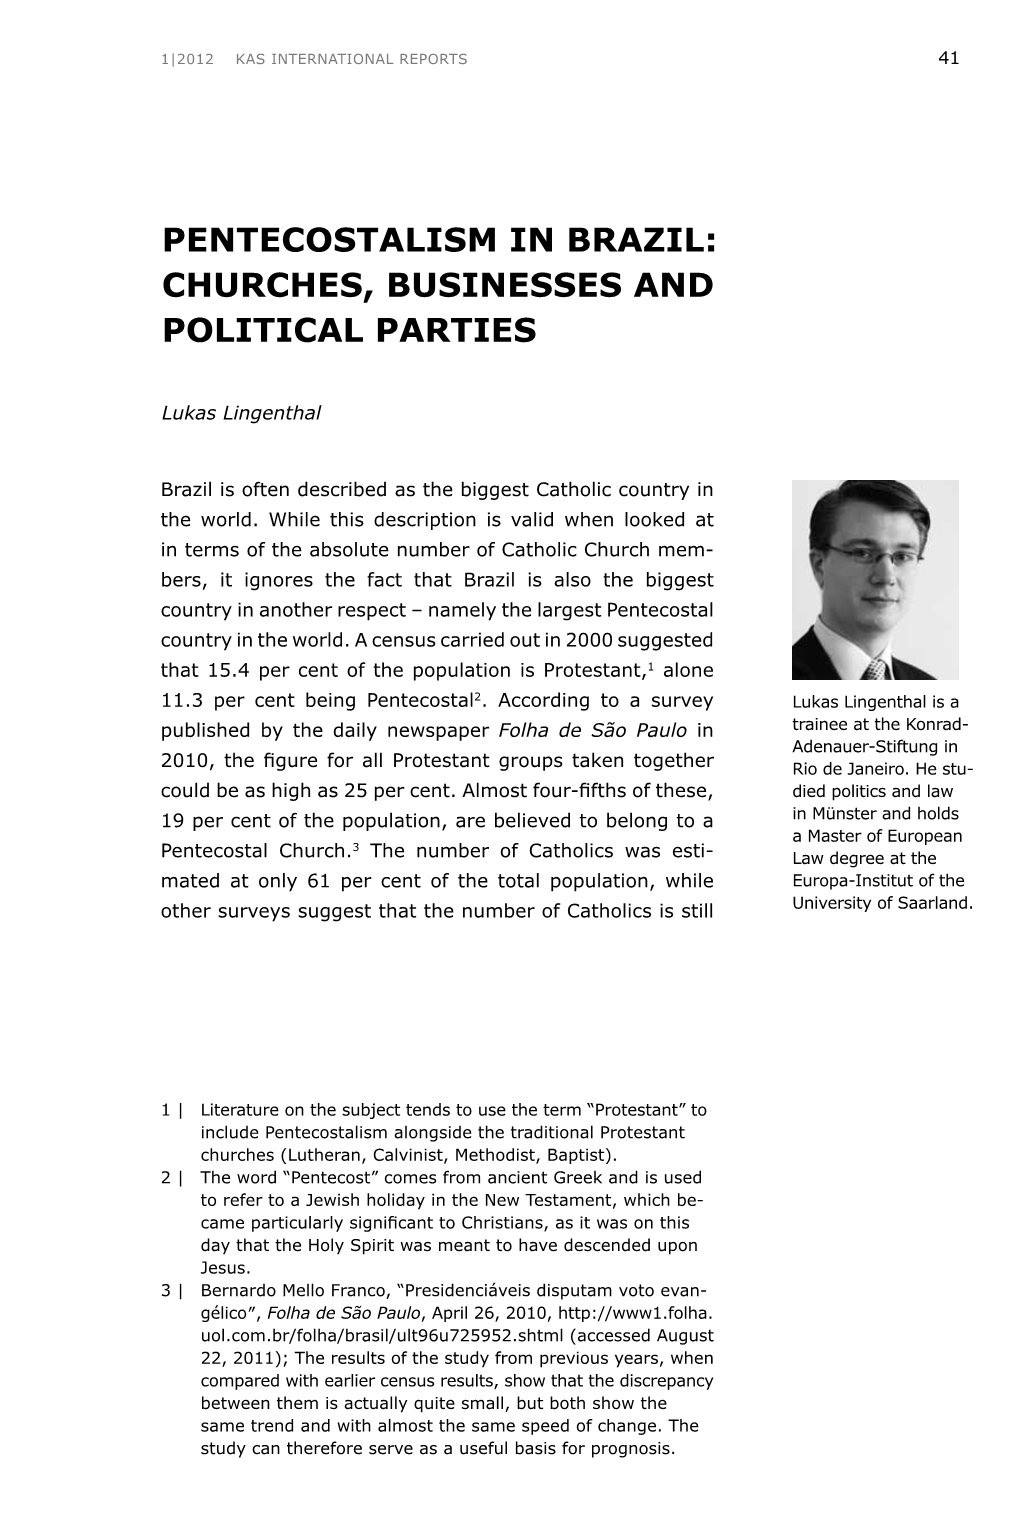 Pentecostalism in Brazil: Churches, Businesses and Political Parties